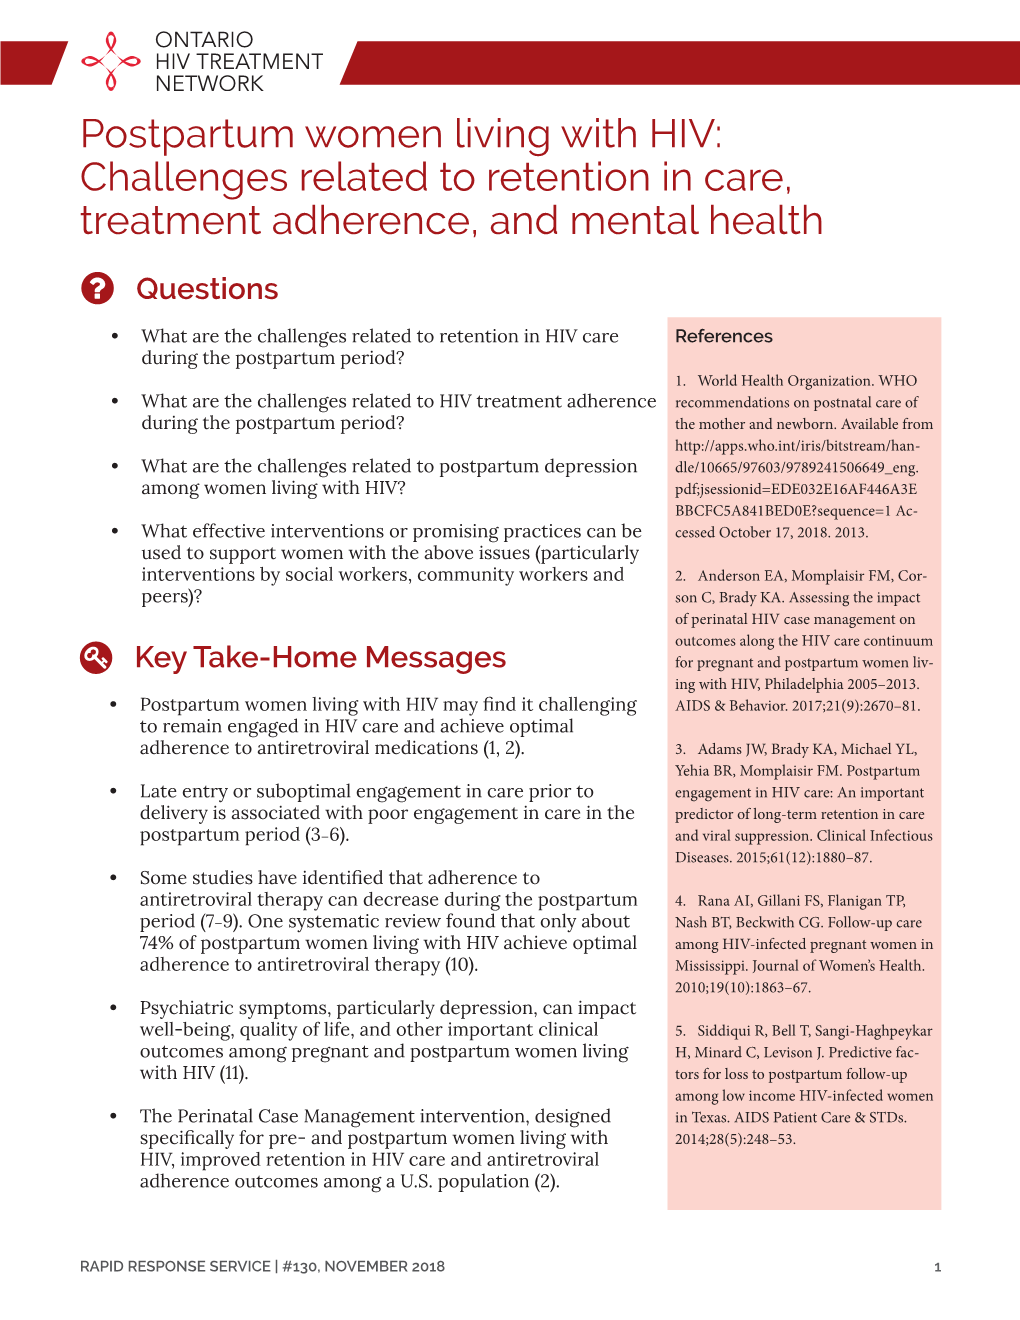 Postpartum Women Living with HIV: Challenges Related to Retention in Care, Treatment Adherence, and Mental Health